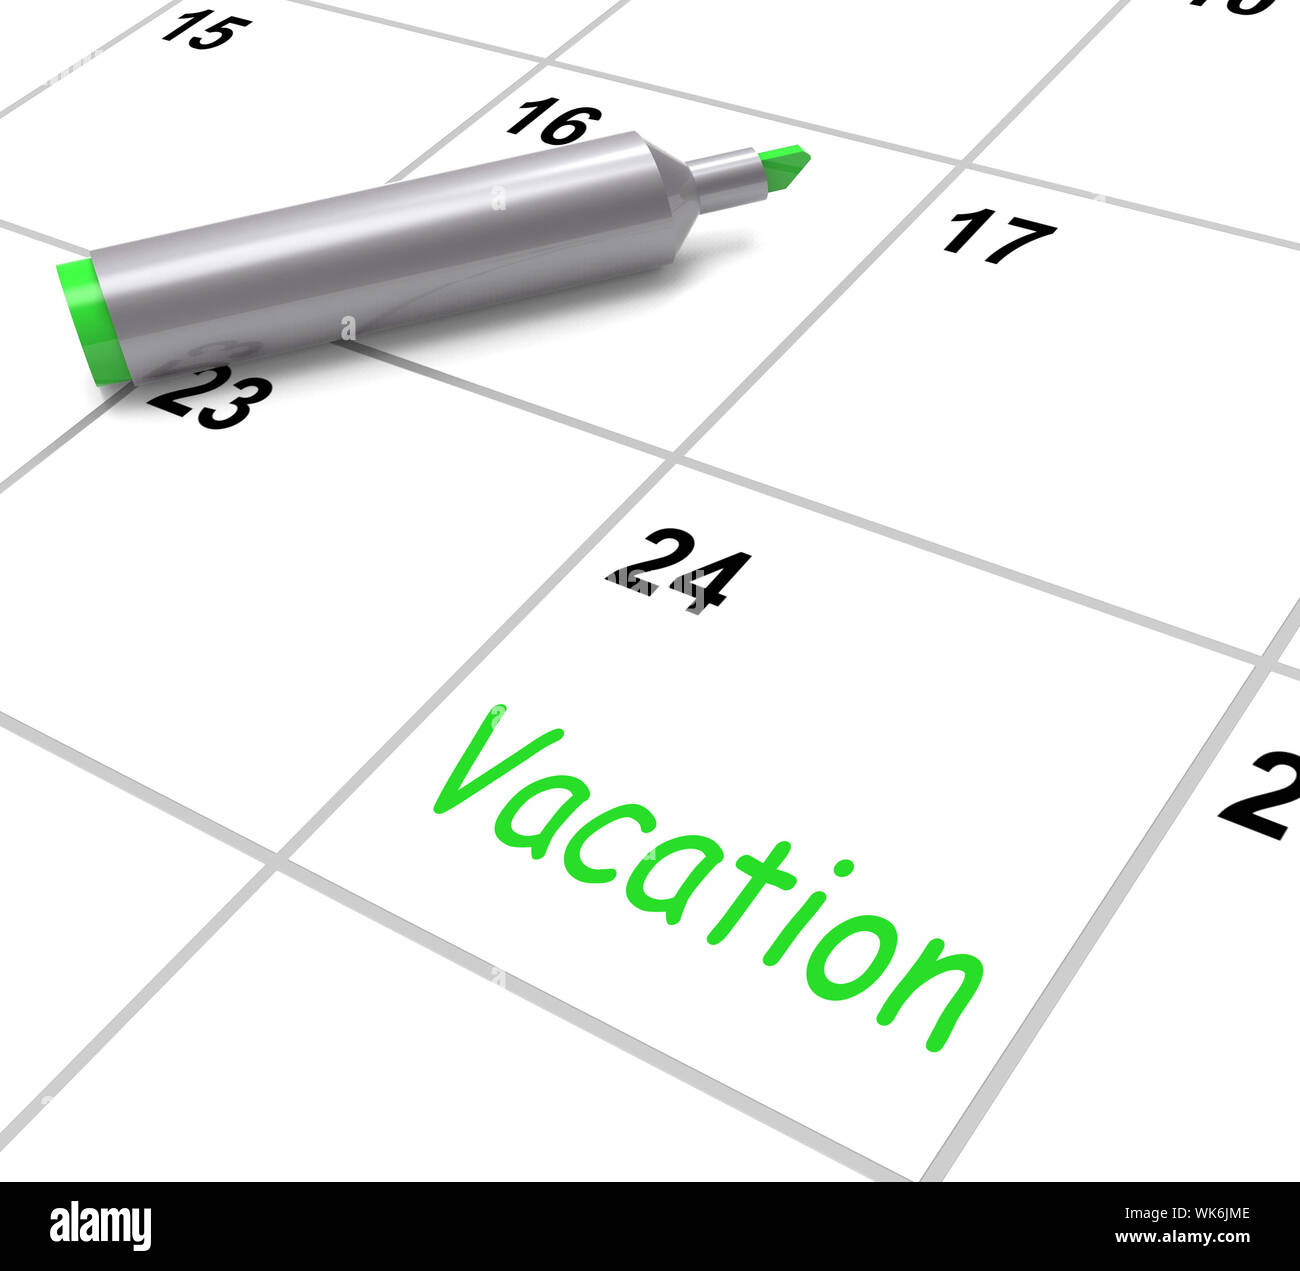 Vacation Calendar Showing Day Off Work Or Holiday Stock Photo